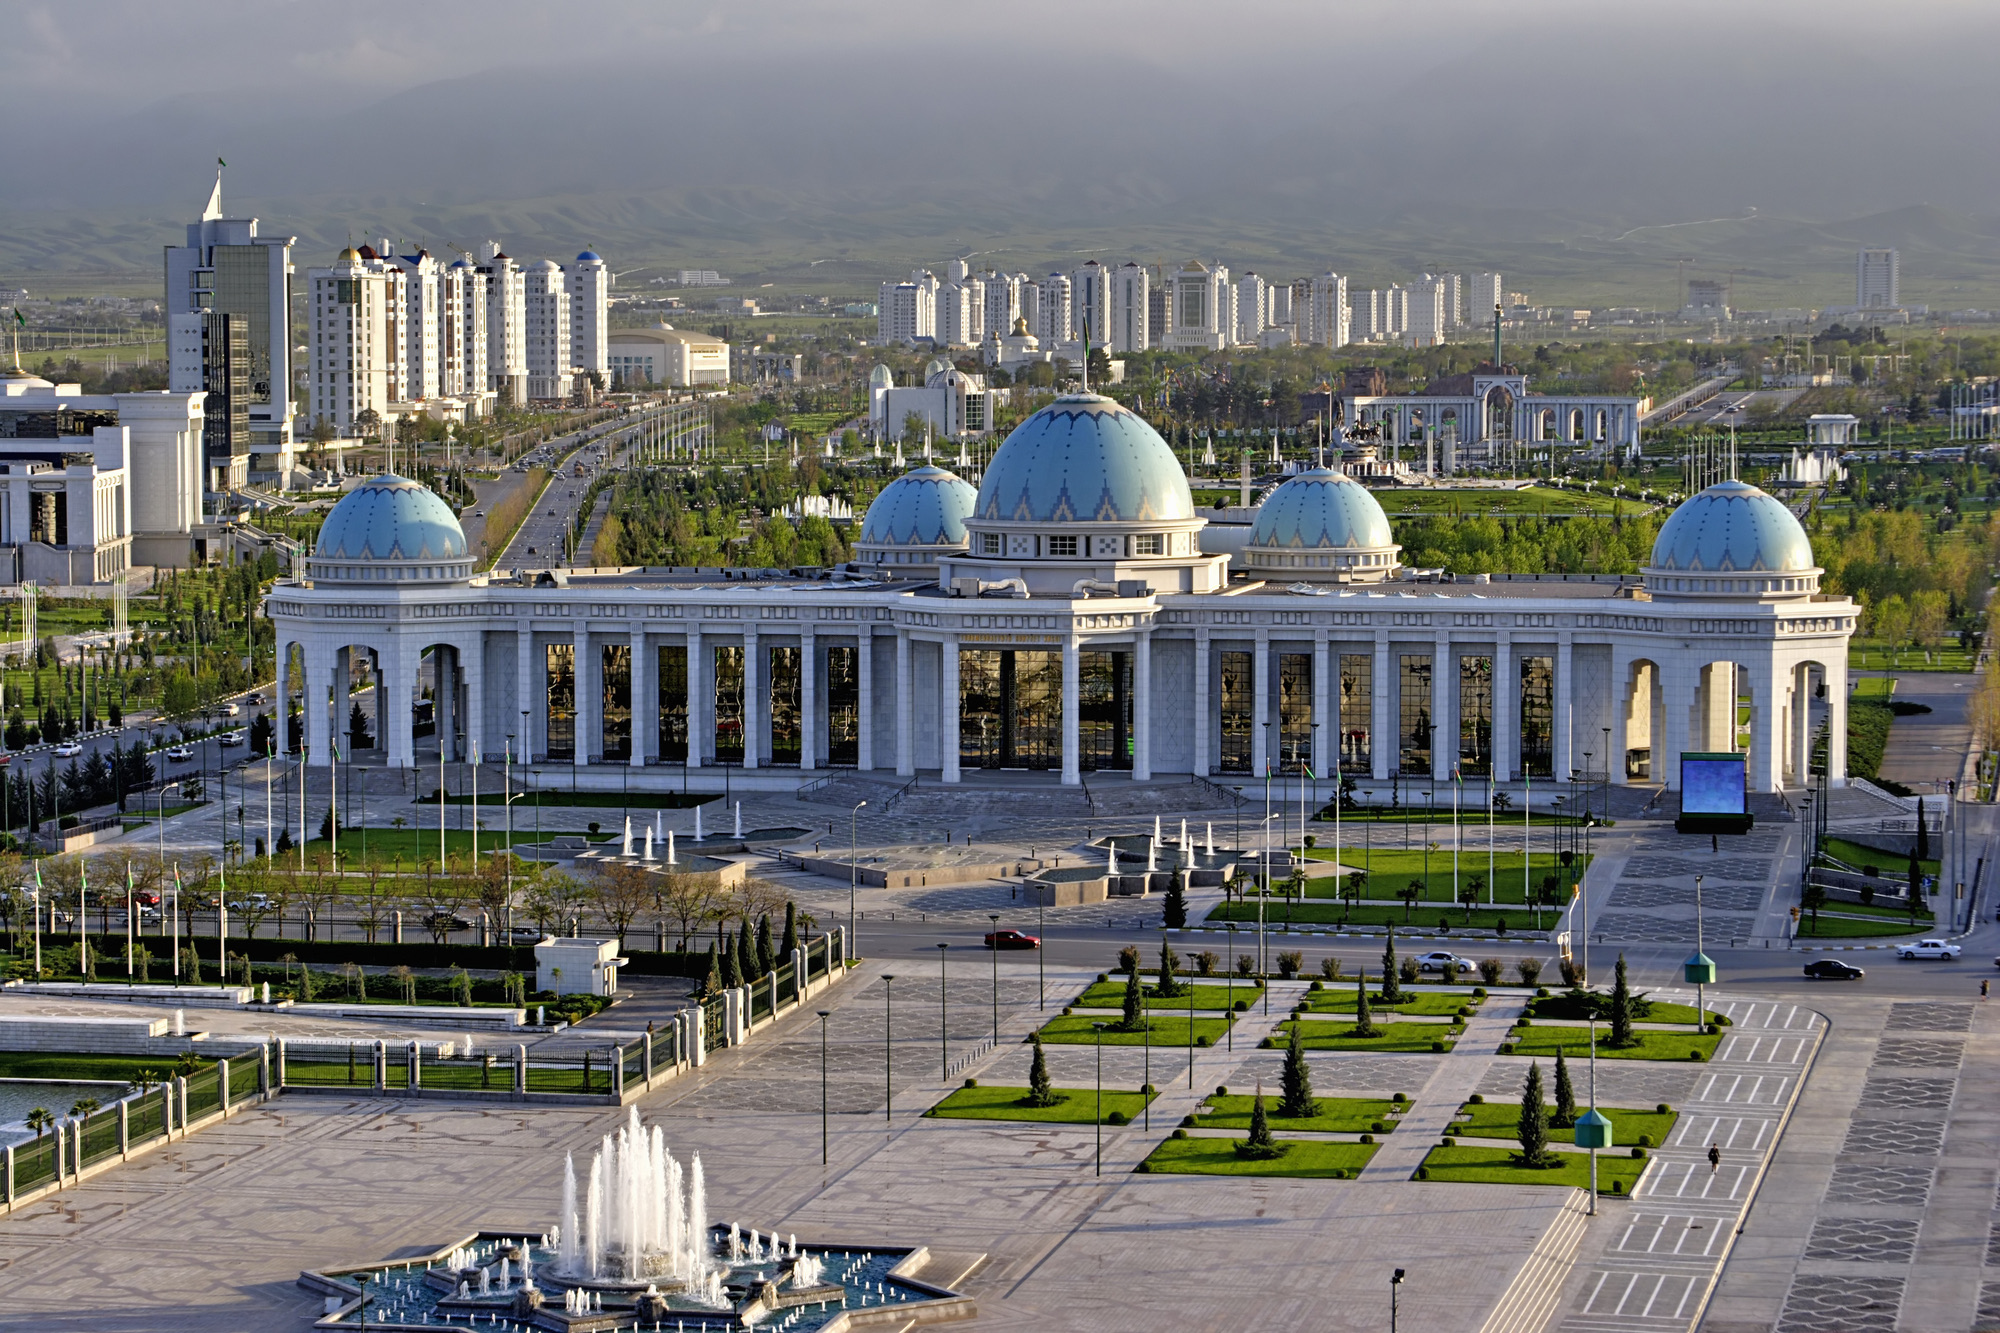 General Views to the main square and palace Ruhyet. Ashkhabad. Turkmenistan.